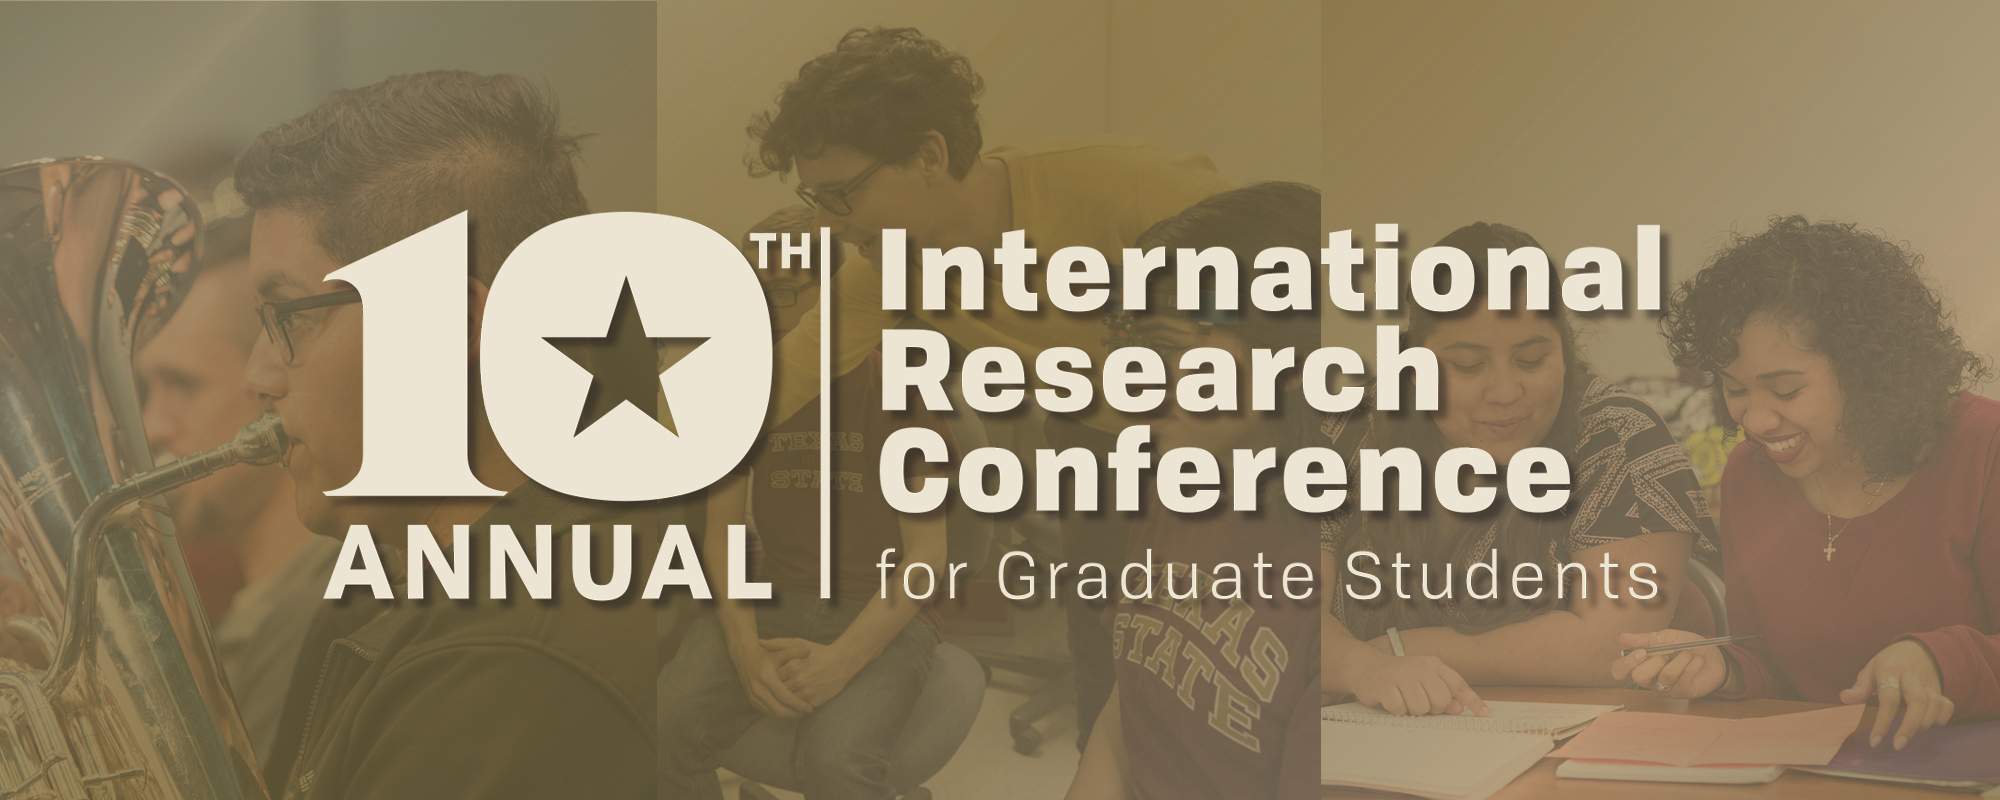 international research conference